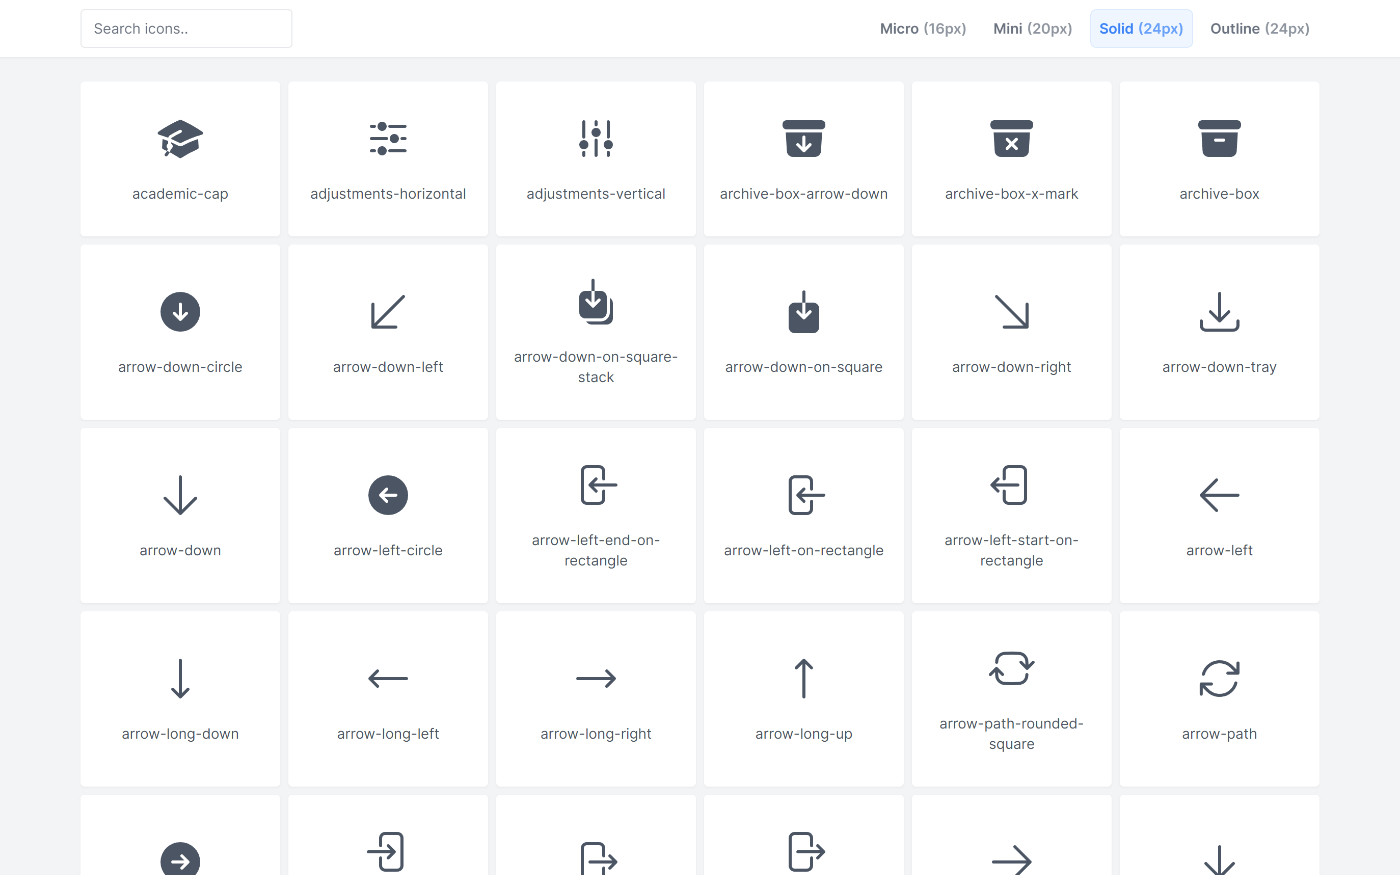 Preview Helper Tool - SVG Icons